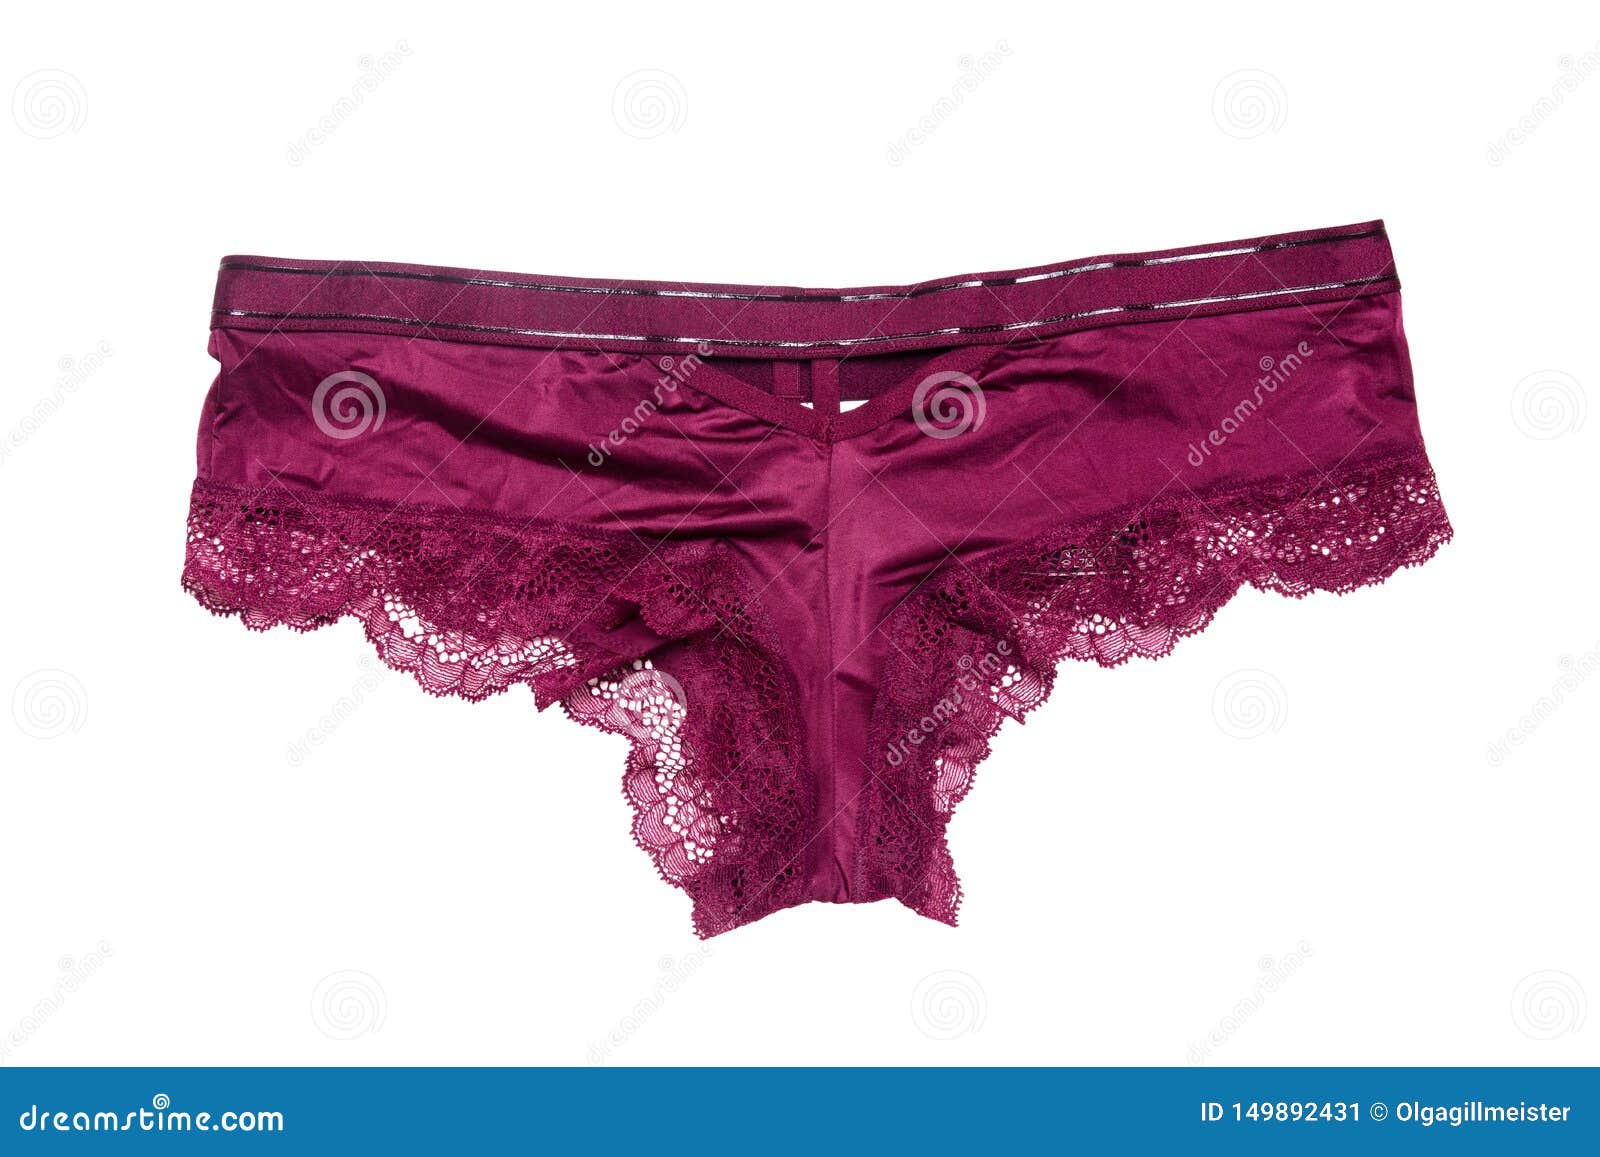 Underwear Woman Isolated. Close-up of Luxurious Elegant Pink Satin